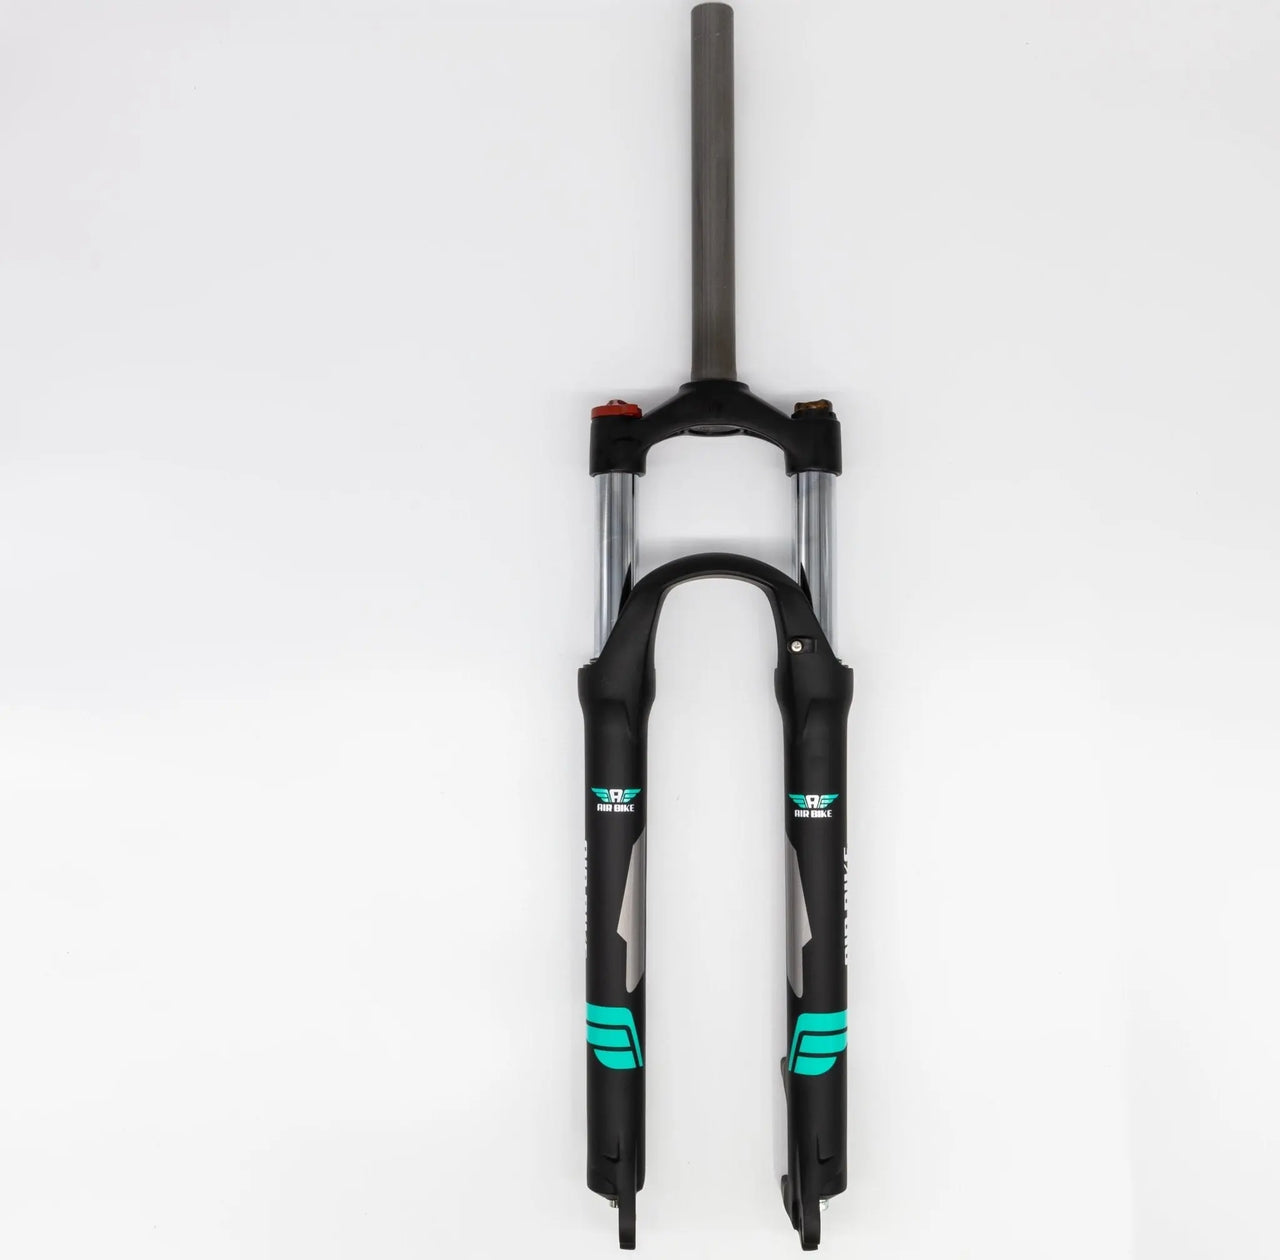 29 Inch Tapered Suspension Fork Black Air Bike XC28 120mm Travel & Lockout Mountain Bike Quick Release Fork - Air BikeSuspension Fork